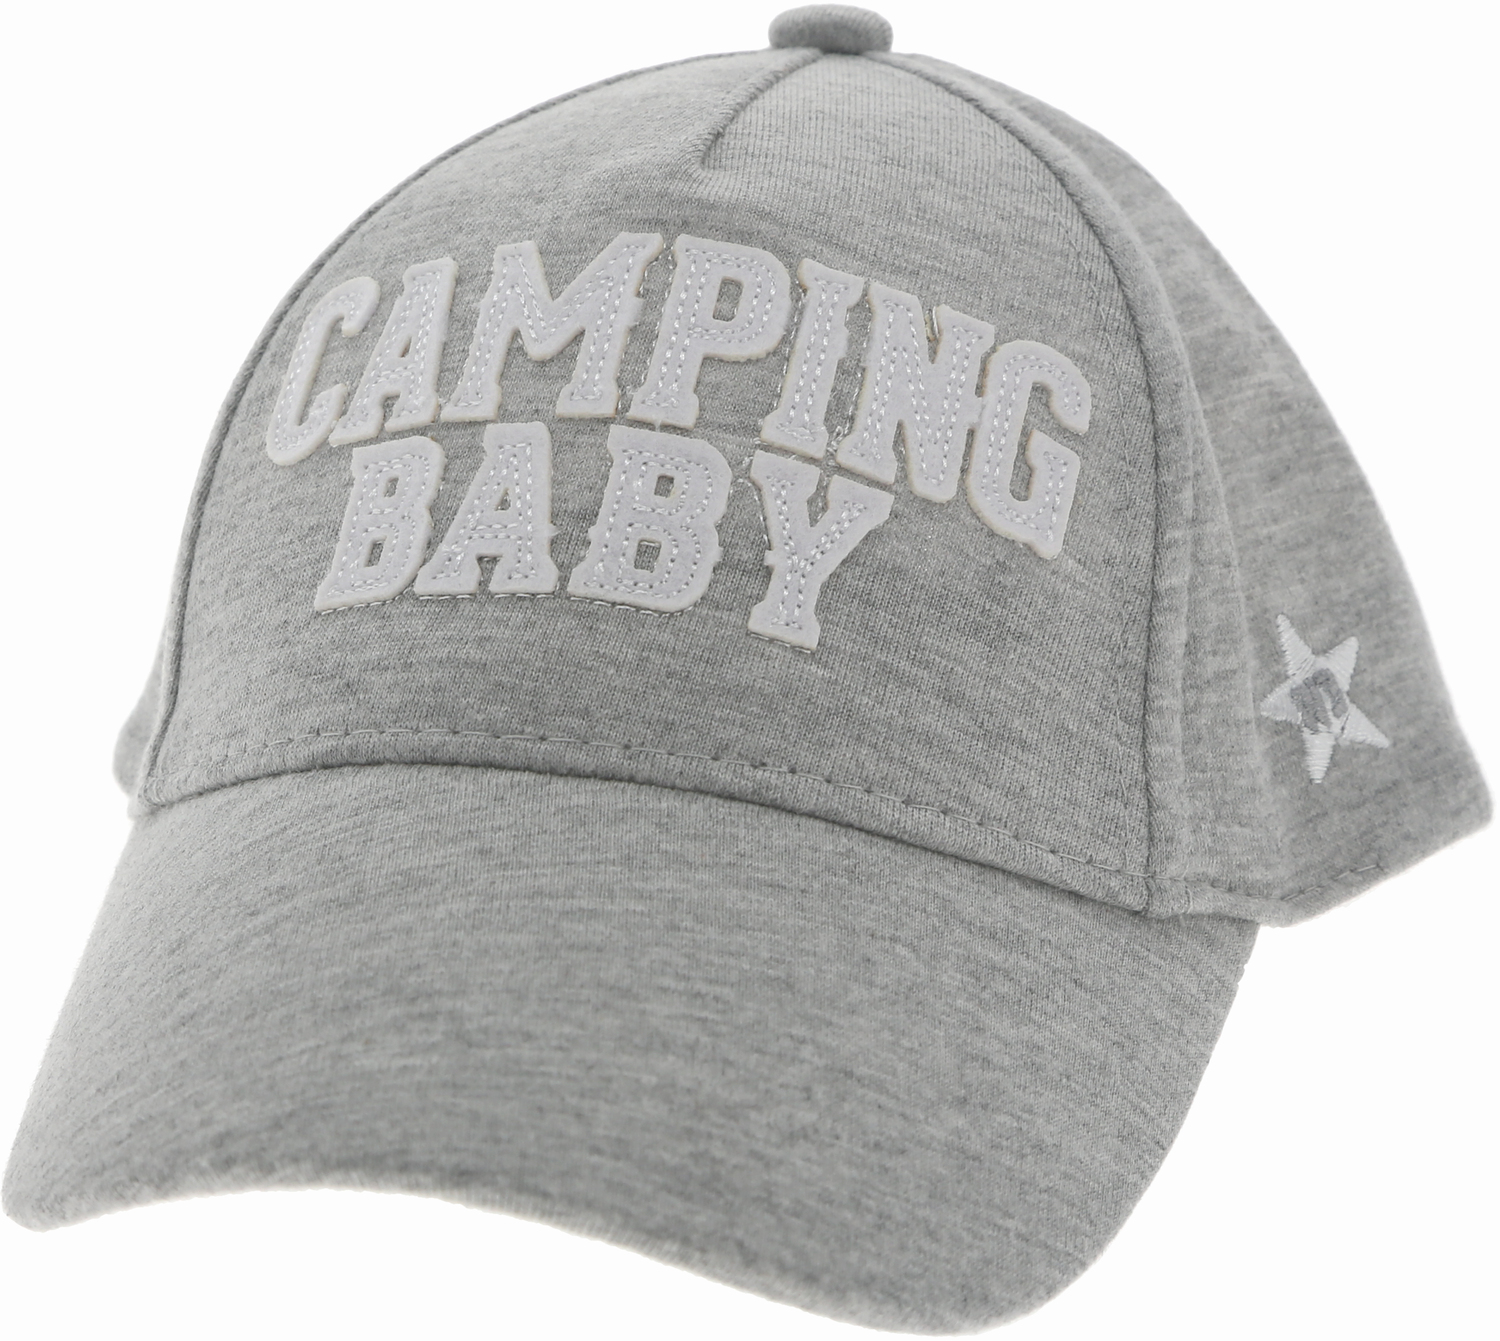 Camping by We Baby - Camping - Adjustable Toddler Hat
(1-3 Years)